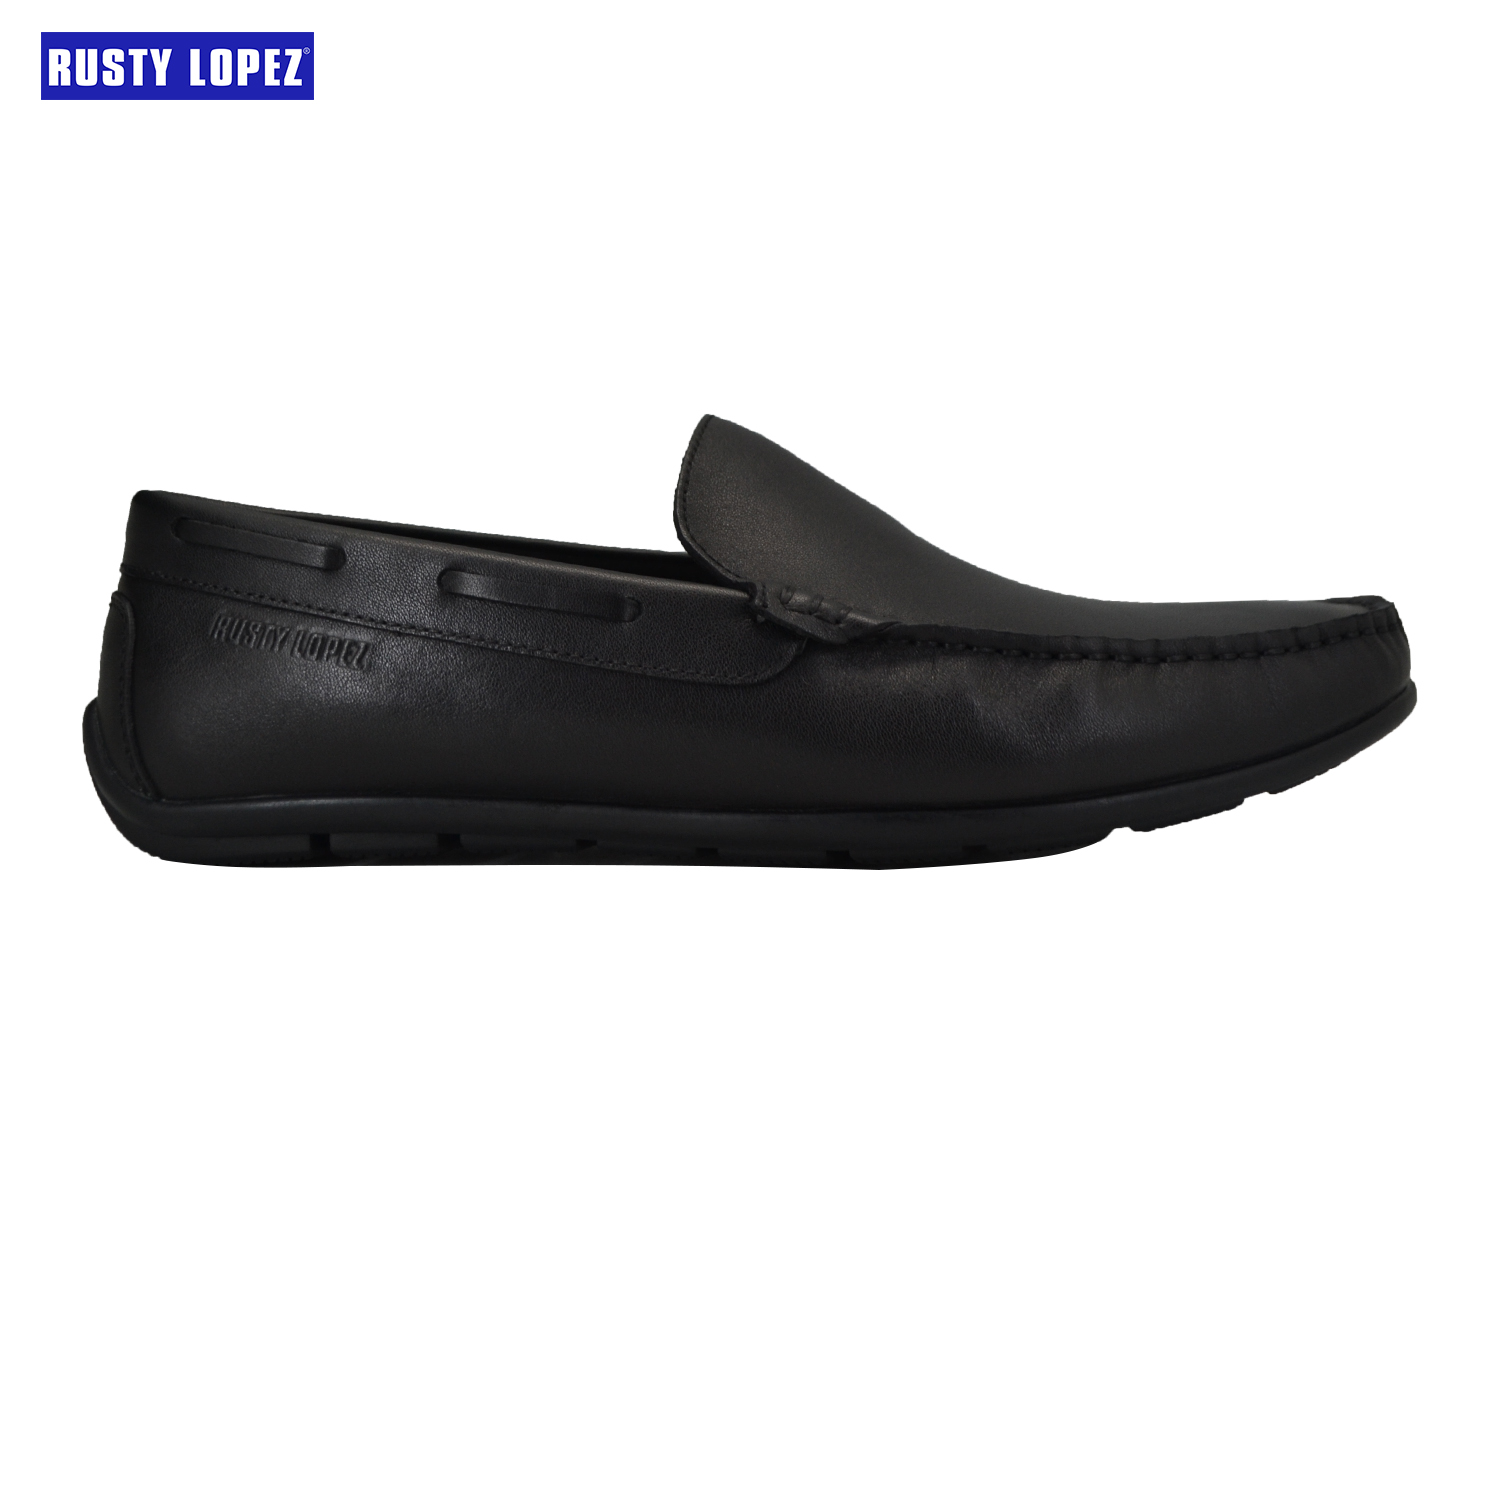 Rusty Lopez Men’s Casual Shoes – JARED